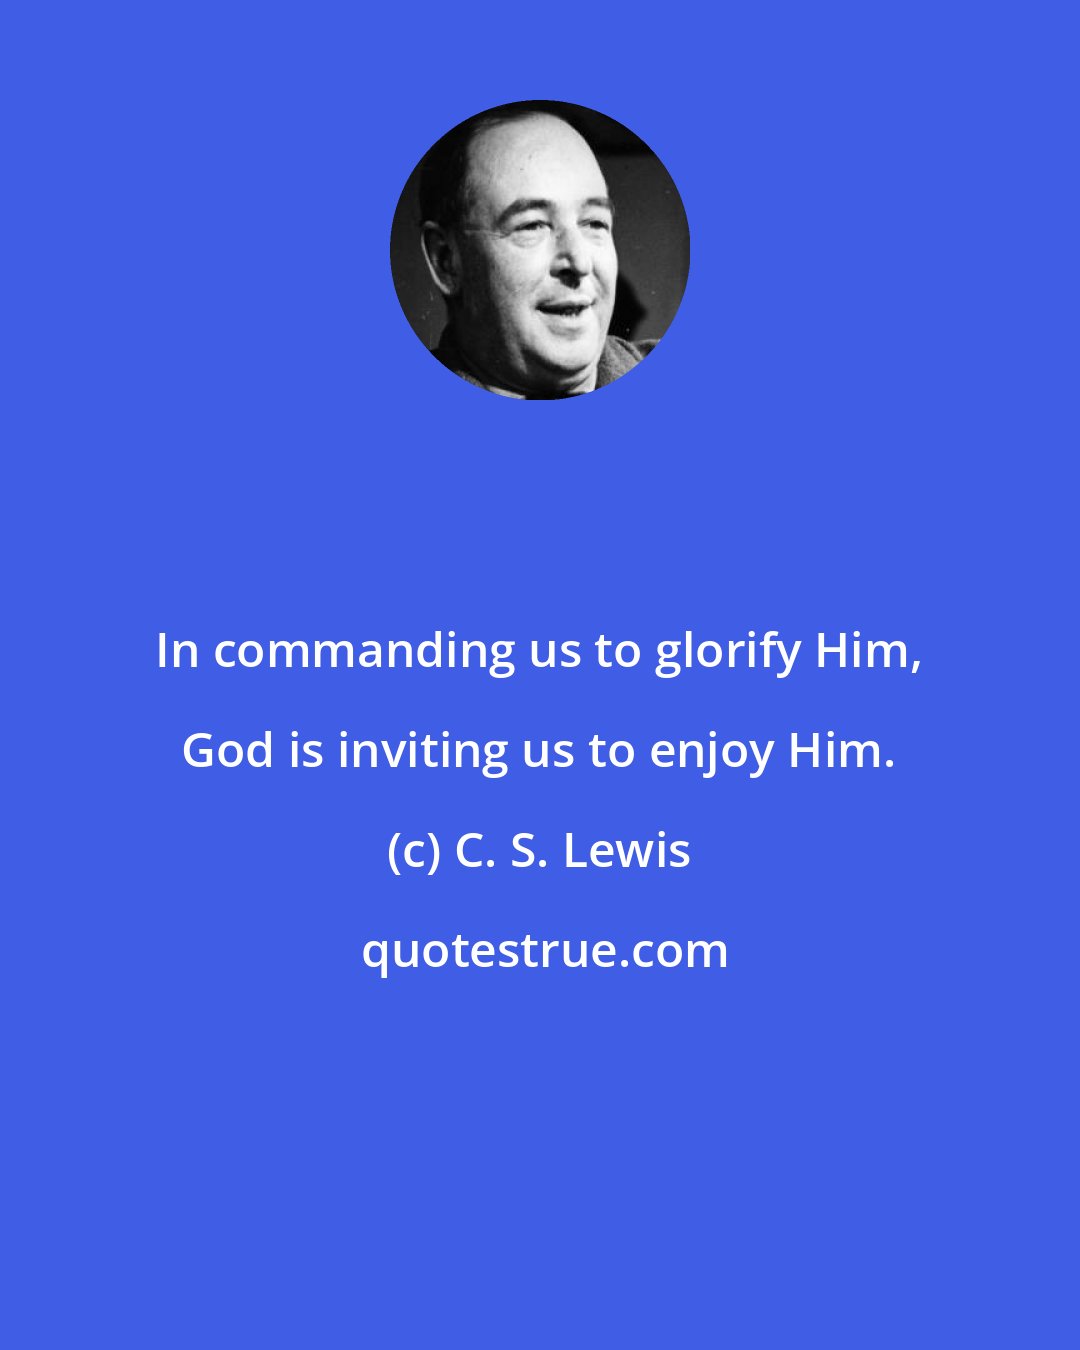 C. S. Lewis: In commanding us to glorify Him, God is inviting us to enjoy Him.